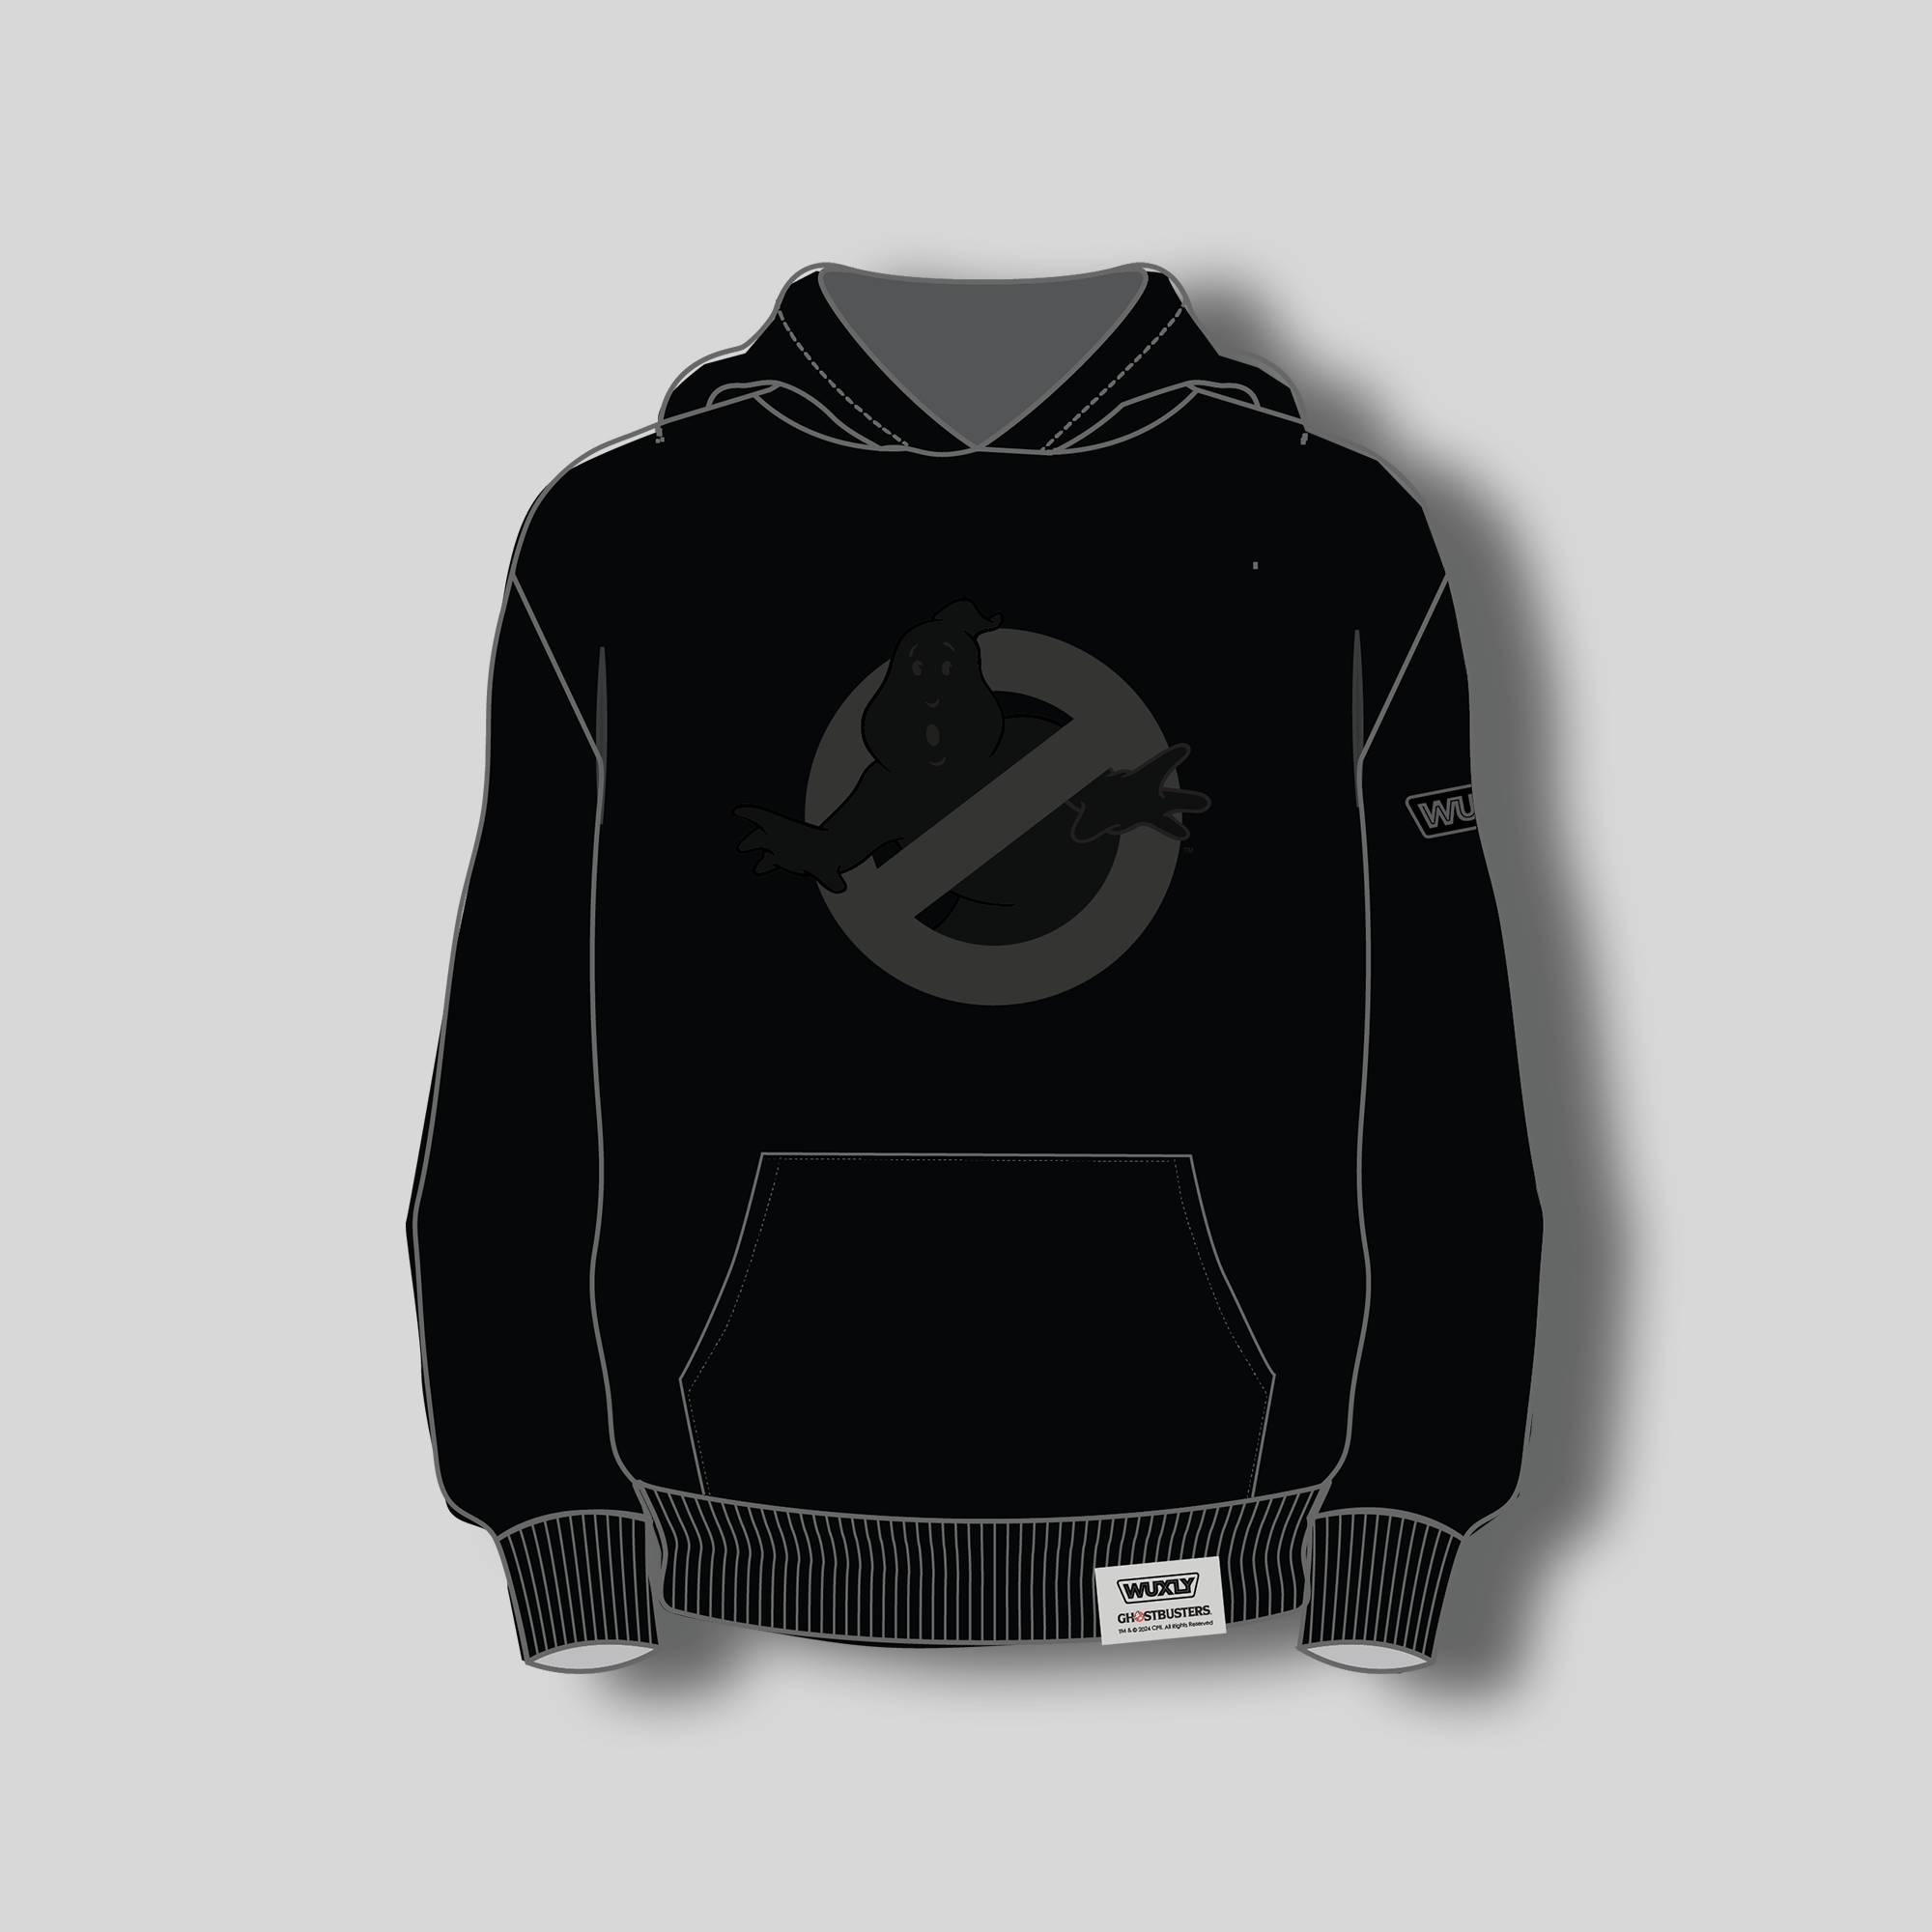 Wuxly x Ghostbusters No Ghost "Blacked Out" Pullover Hoodie